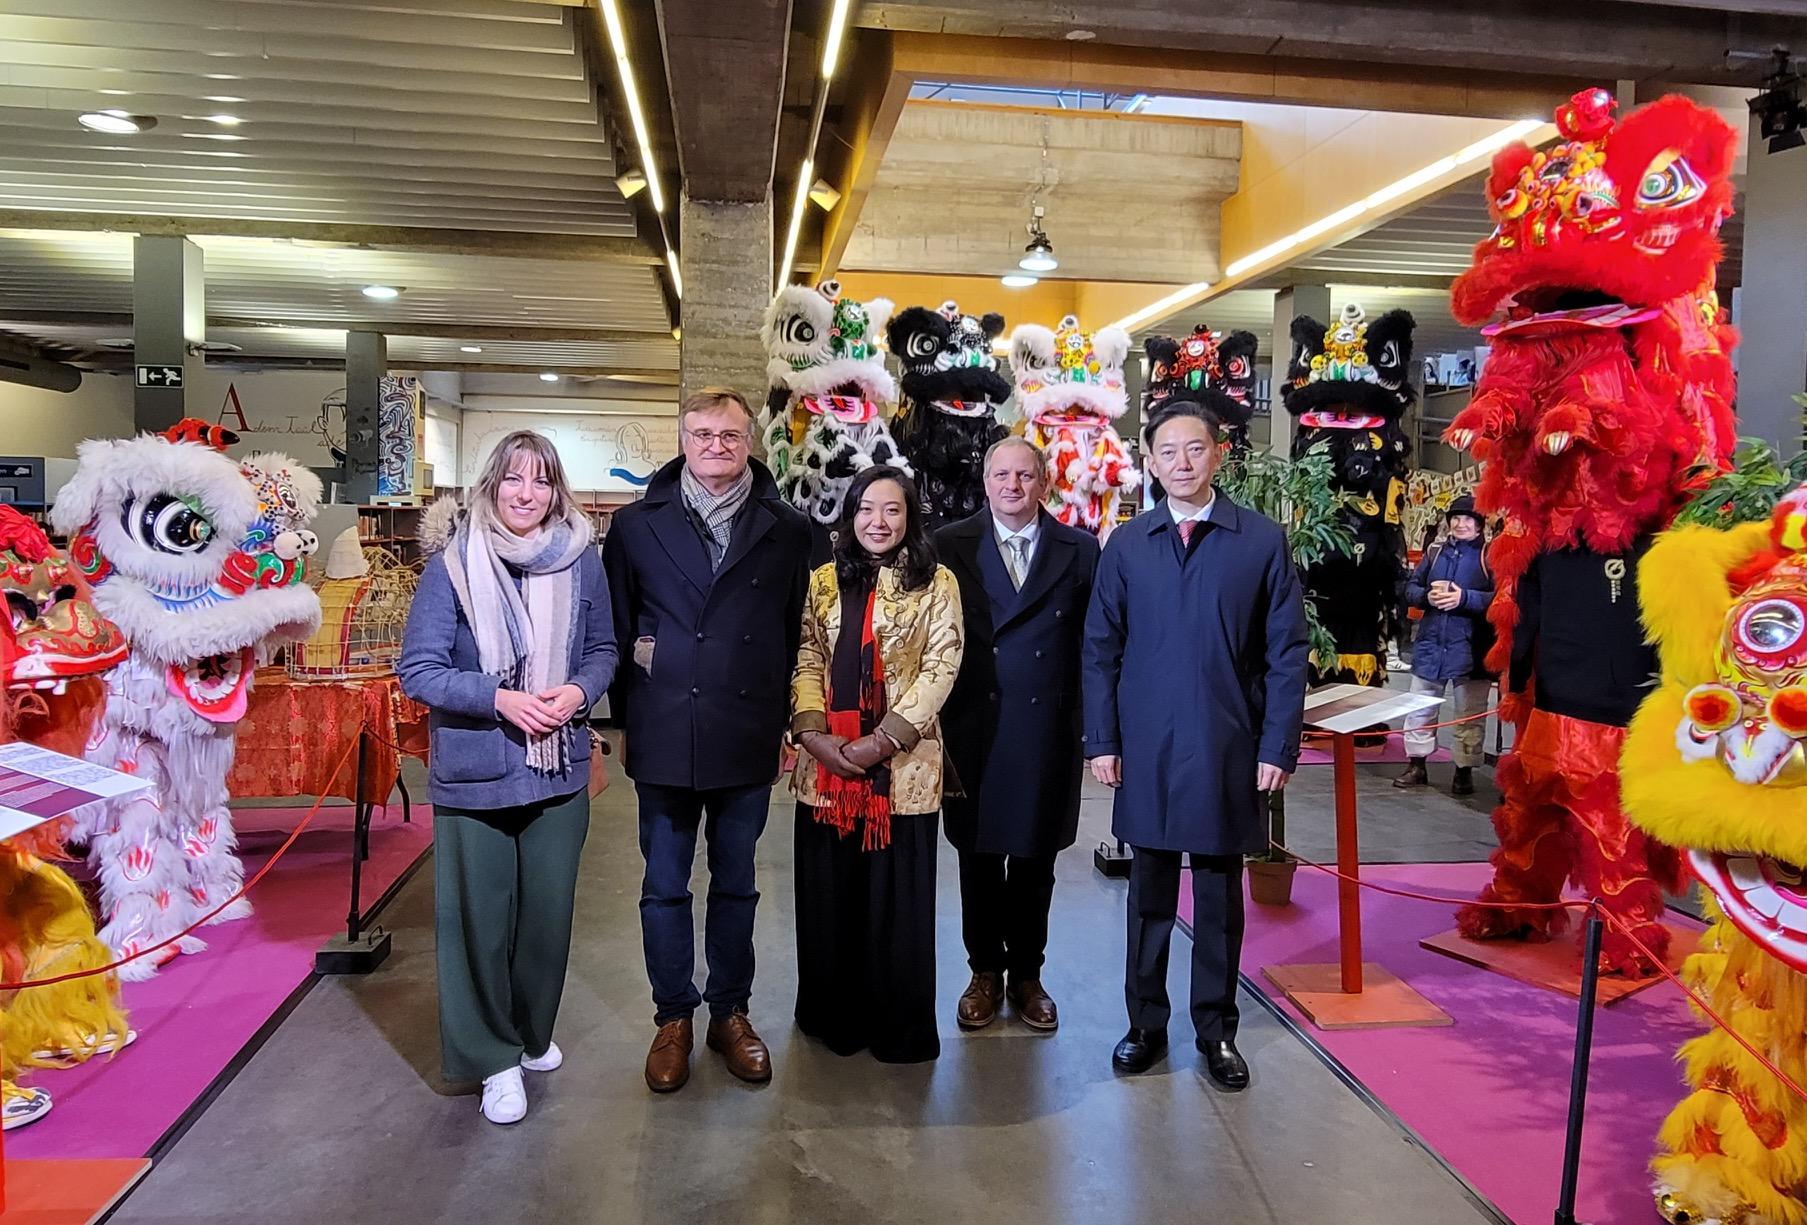 The Hong Kong Economic and Trade Office, Brussels is supporting the seventh edition of the "Legends of Lion Dance" held in the port city of Belgium, Antwerp, from January 13 to 29 (Antwerp time), showcasing Hong Kong's cultural heritage, crafts and Chinese New Year traditions. Photo shows the Acting Special Representative for Hong Kong Economic and Trade Affairs to the European Union, Miss Grace Li (centre); the Minister Counsellor of the Embassy of the People’s Republic of China in the Kingdom of Belgium, Mr Wu Gang (first right); the Chairman of the Belgium-Hong Kong Society, Mr Alexander De Beir (second left); and government officials of the city of Antwerp attending the exhibition held during the “Legends of Lion Dance” at Antwerp, Belgium on January 22 (Antwerp time).